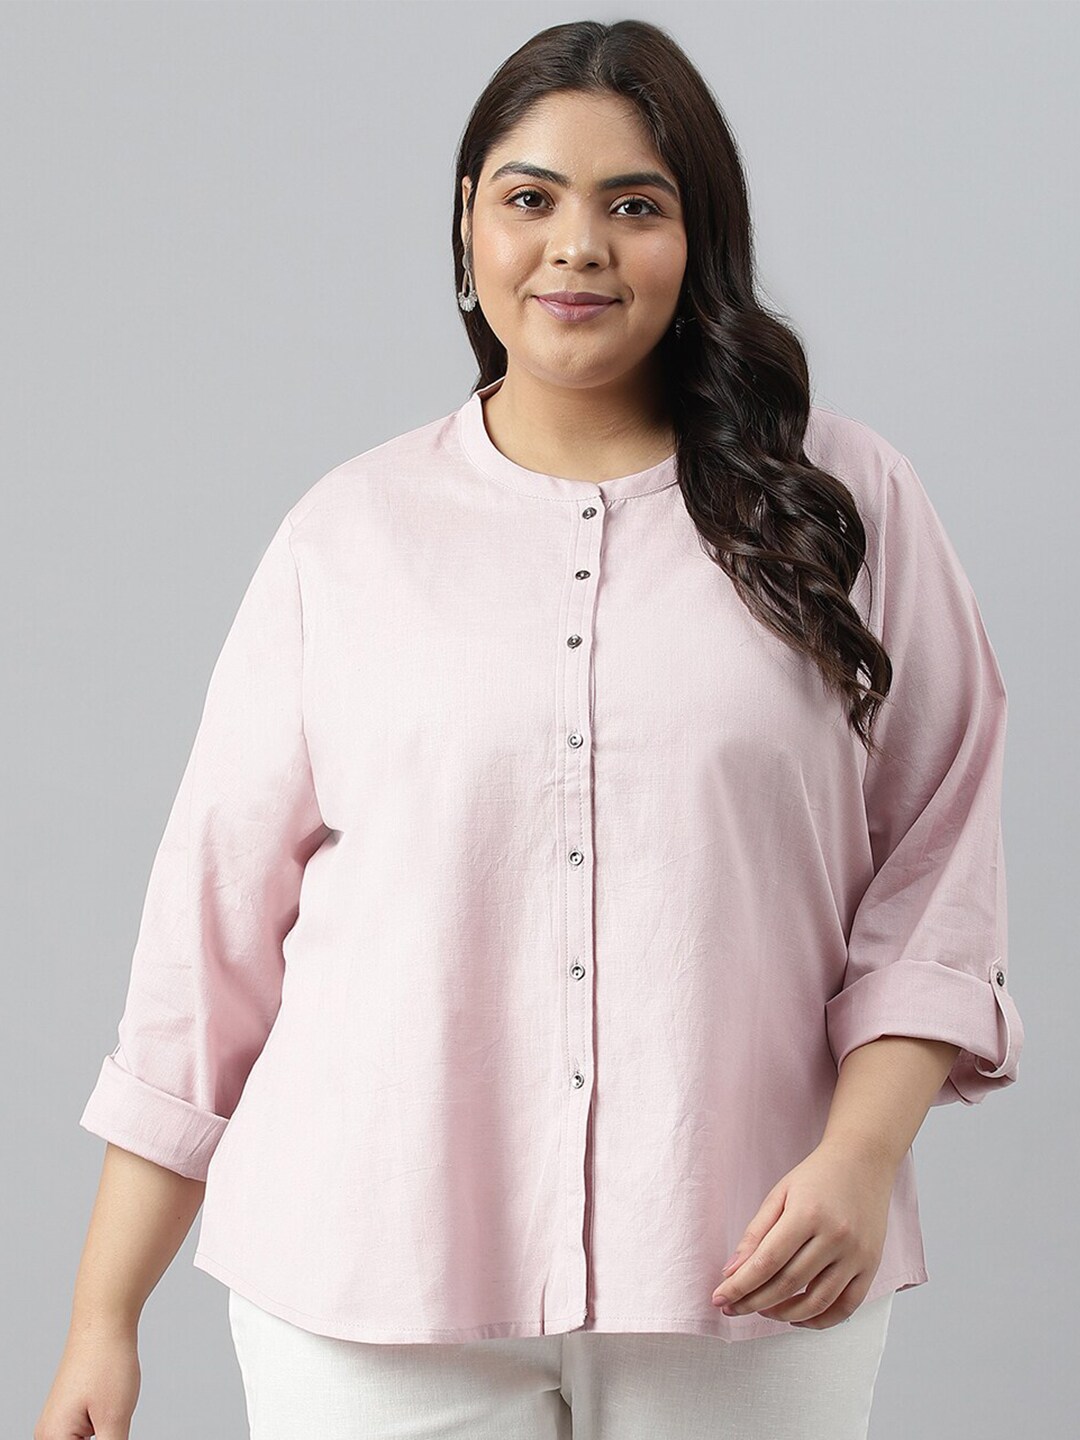 W Plus Size Cotton Roll-Up Sleeves Shirt Style Top Price in India